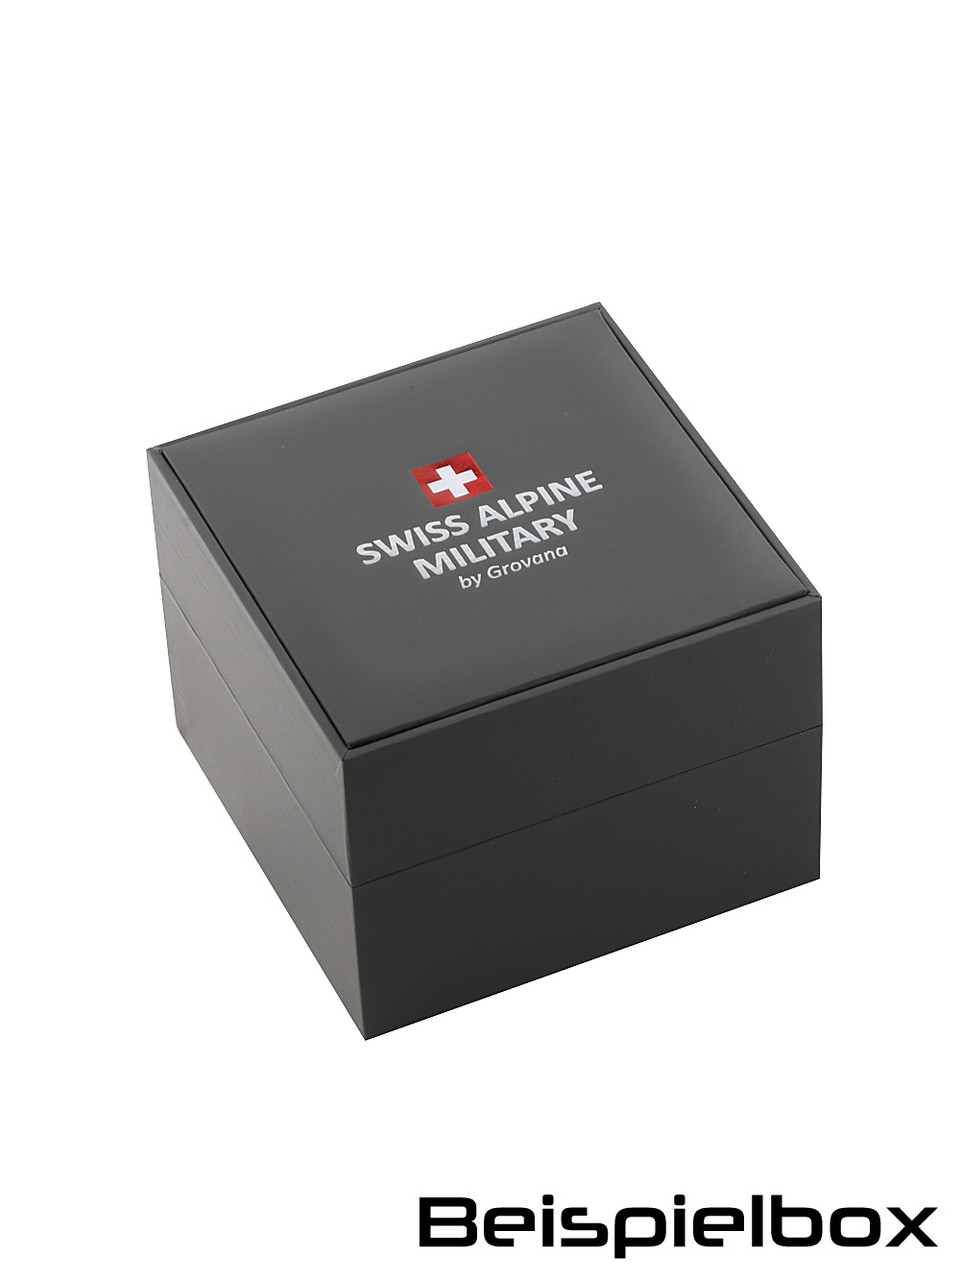 Unboxing the Swiss Alpine Military 7043.9135 Mens Watch 